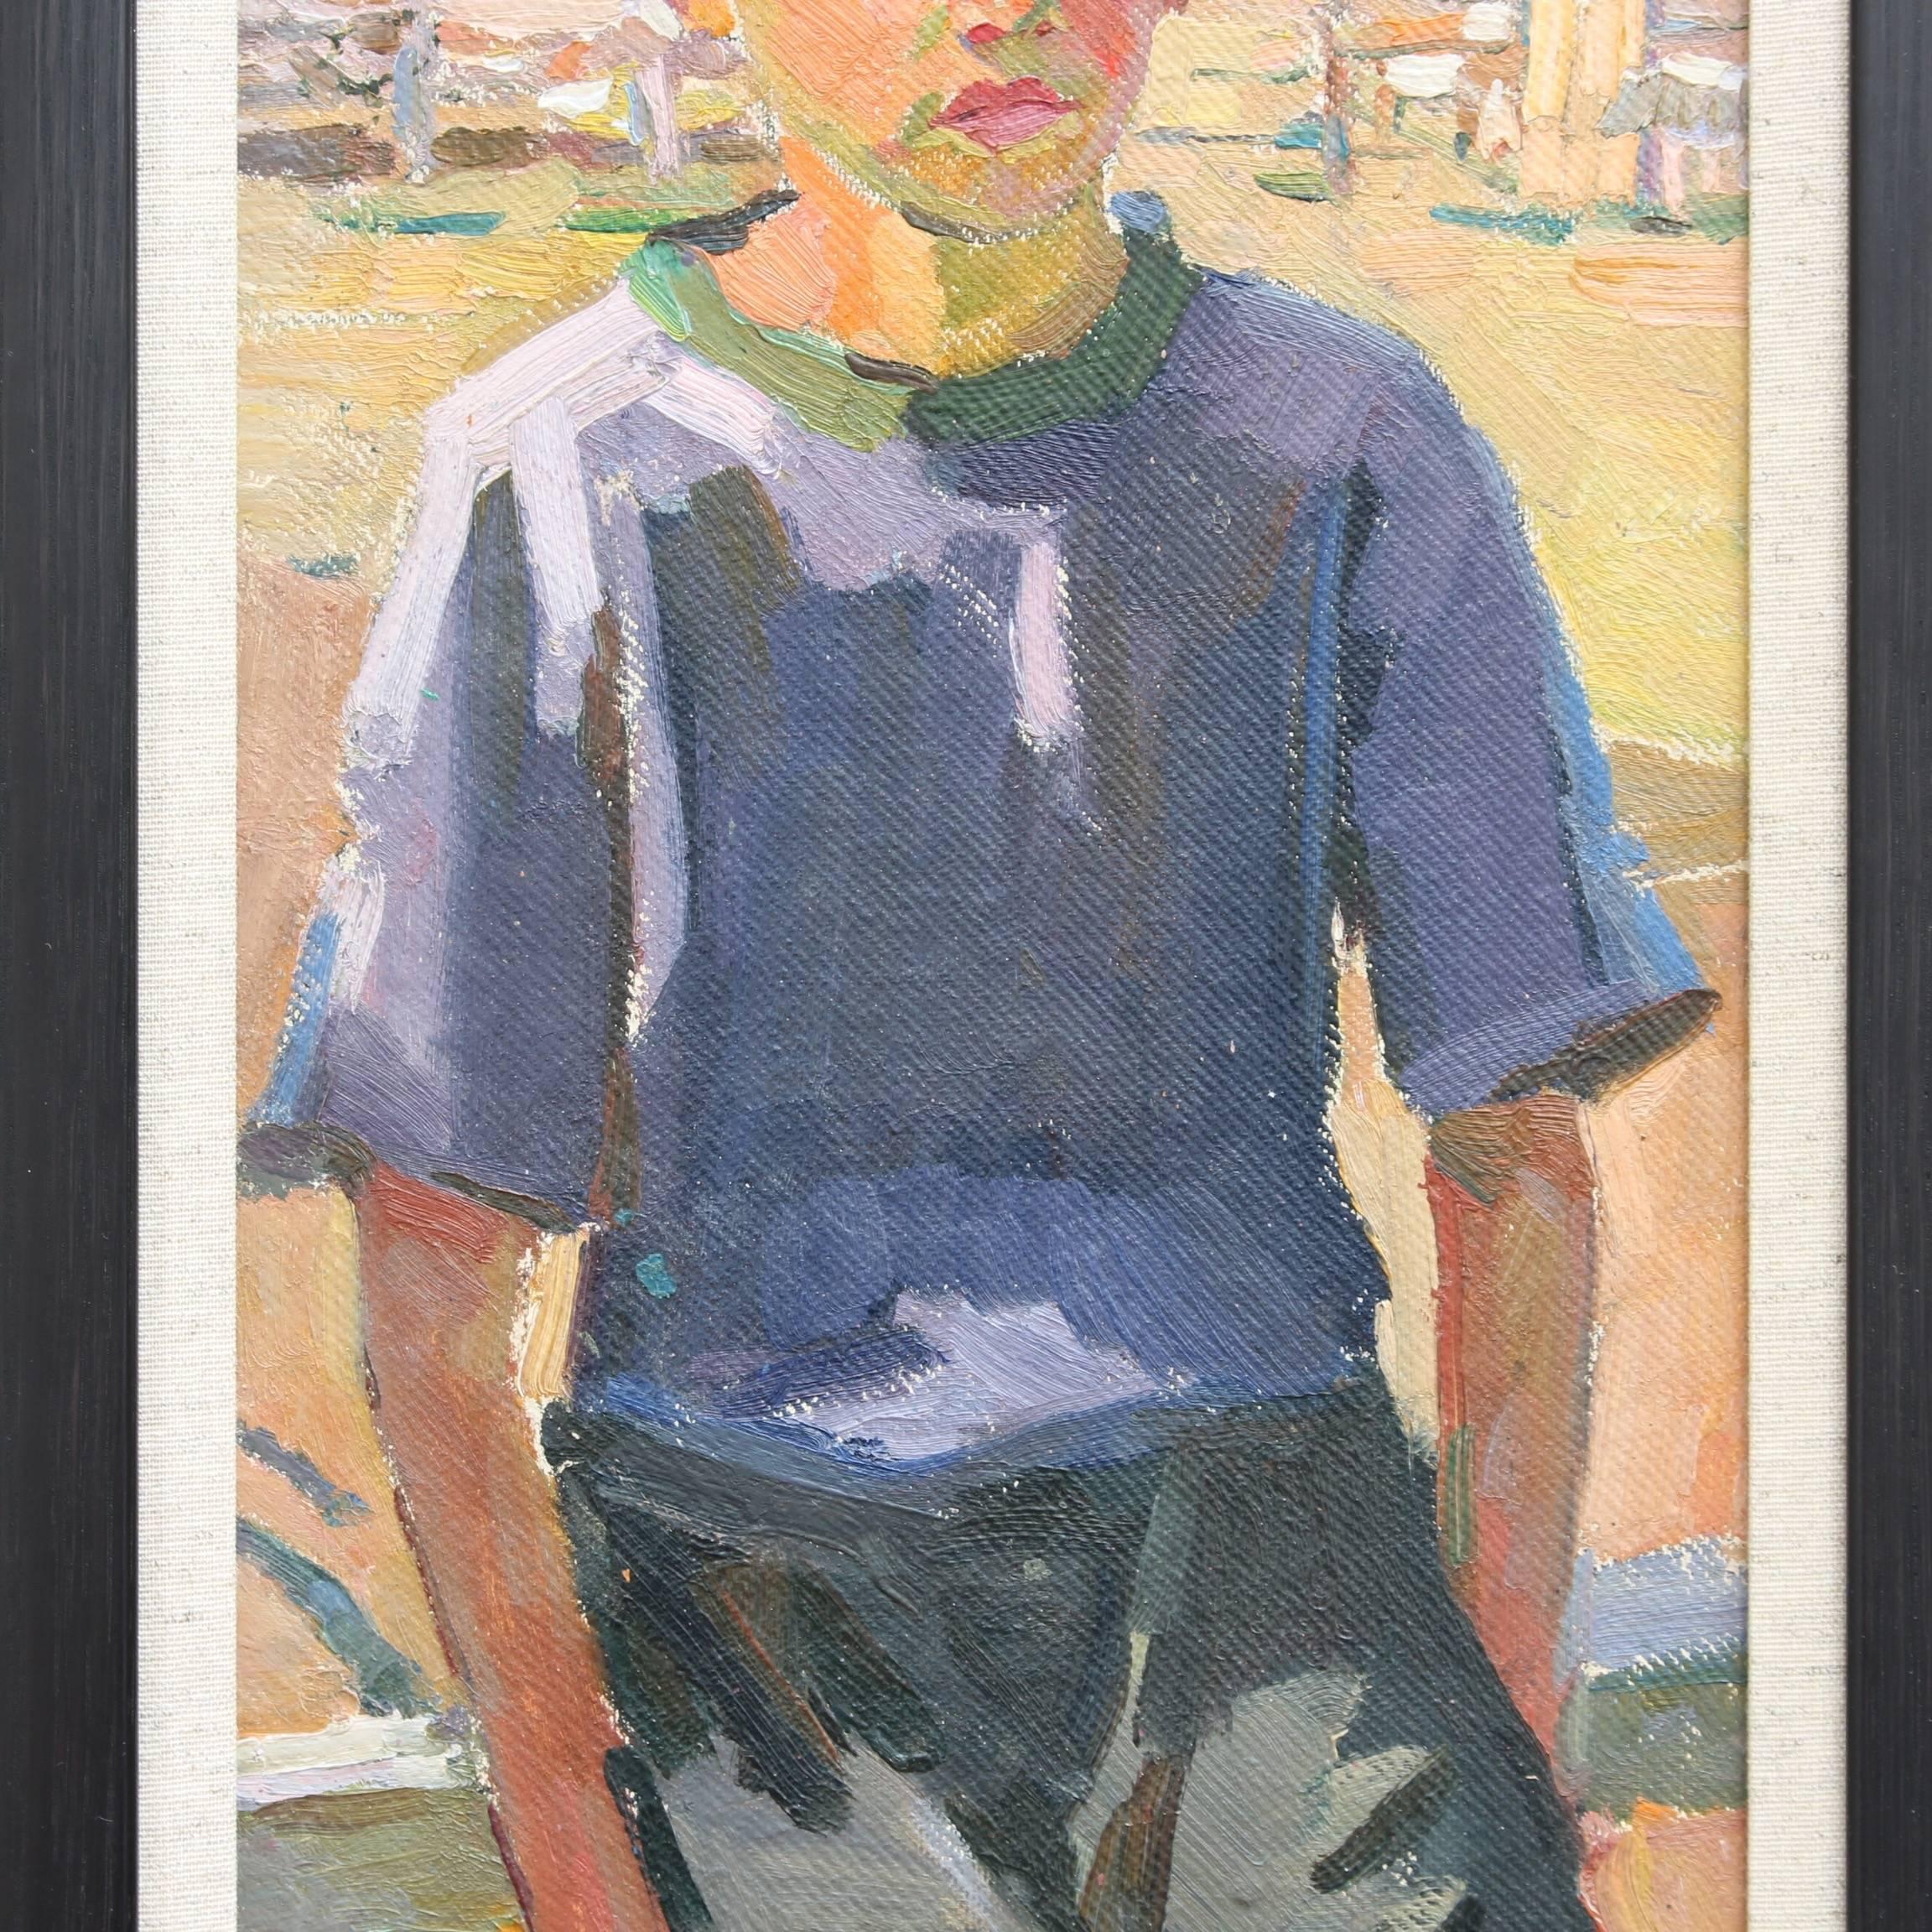 'Farm Boy', oil on board, by unknown European artist (Circa 1970s). Stunning colourful portrait of a young farm boy. An array of palette colours: green, blue, magenta, orange, red and brown were used to create this thoughtful portrait. Behind the